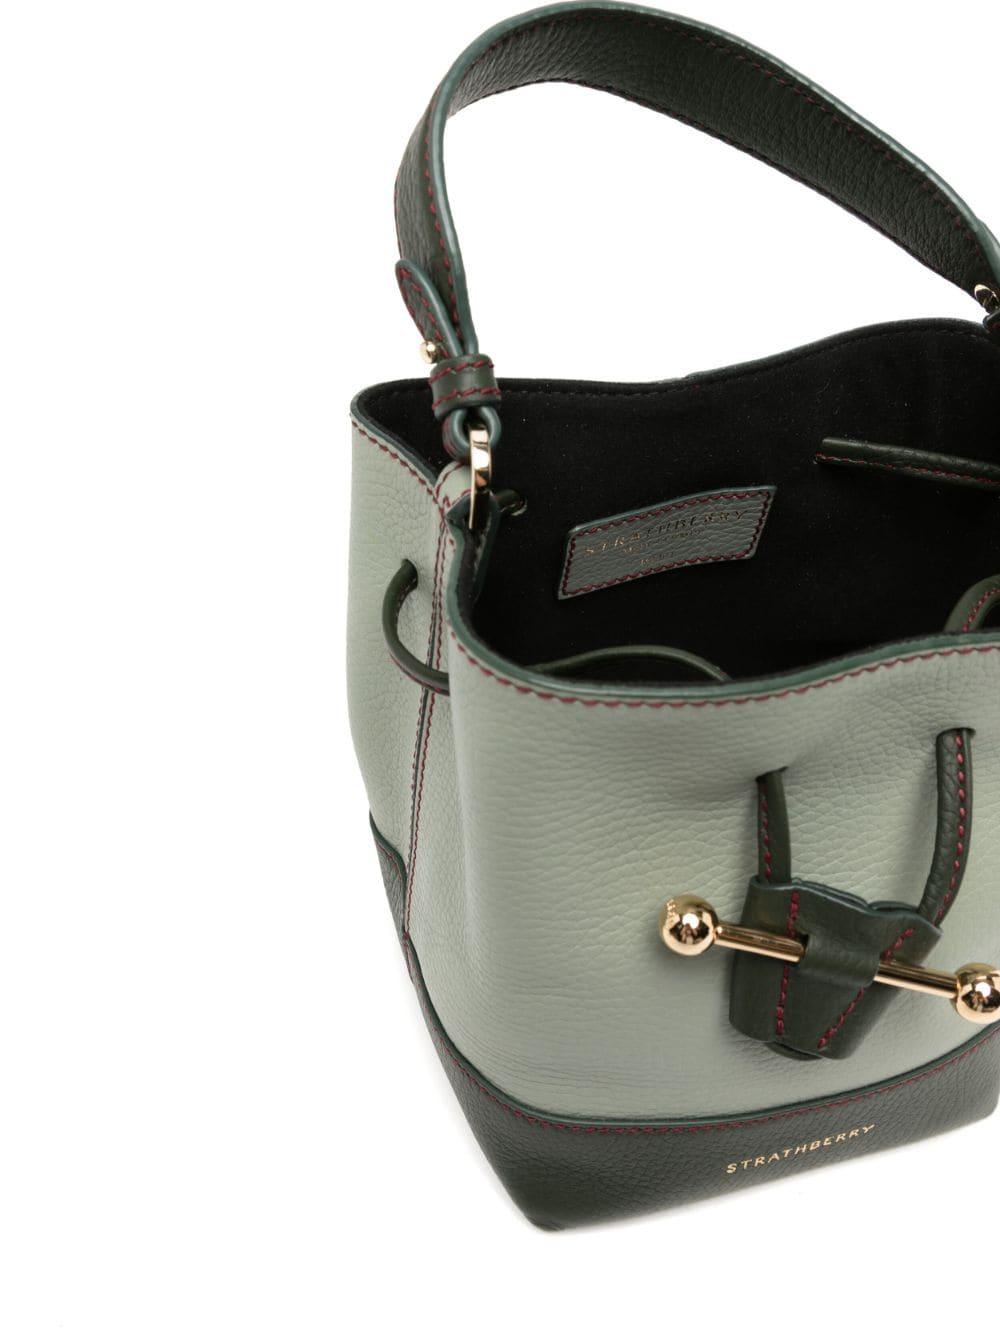 Strathberry Lana Osette Bicolor Leather Crossbody Bucket Bag in